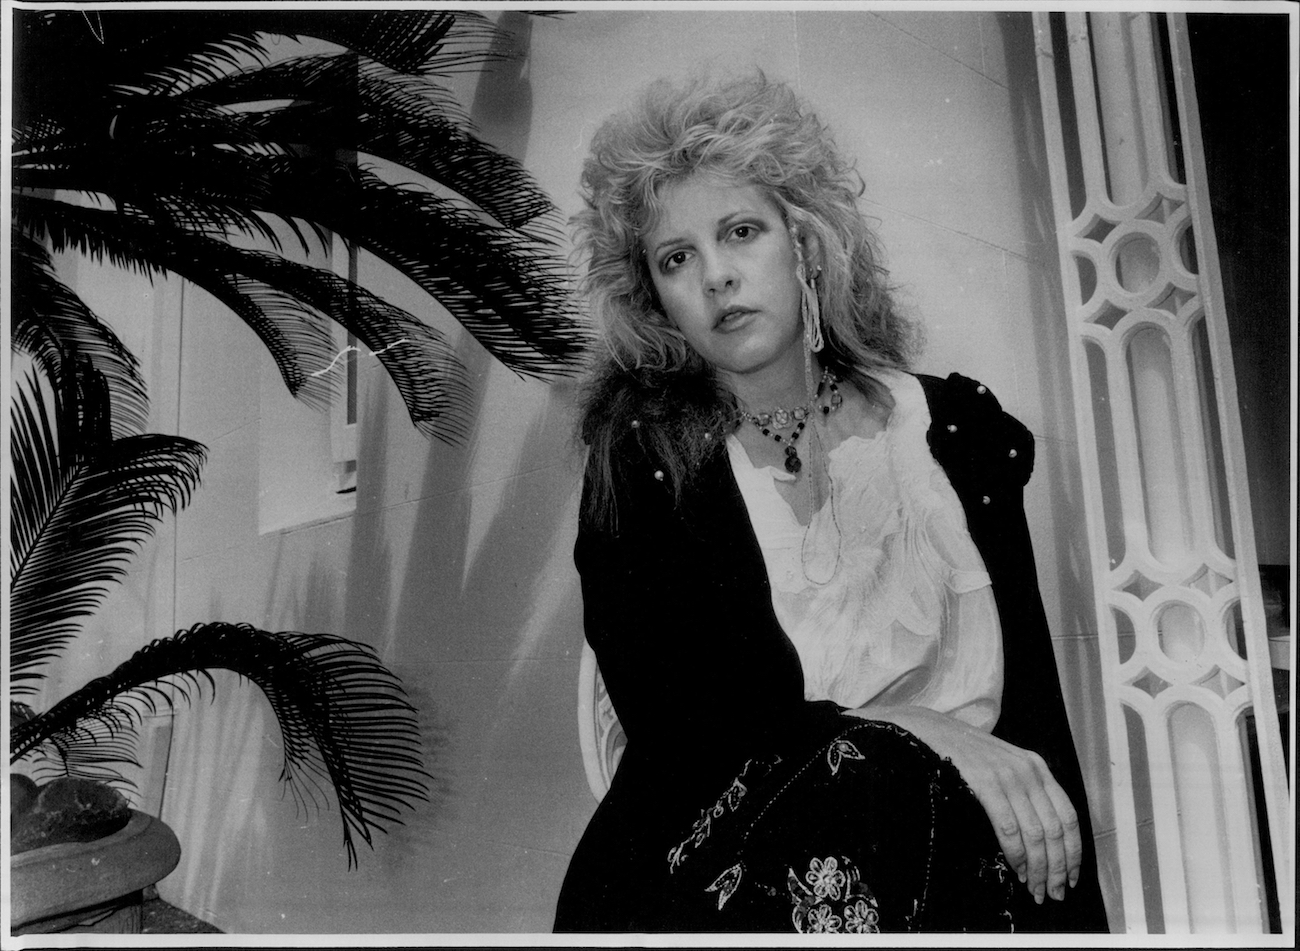 Stevie Nicks wearing black and white for the camera in 1986.